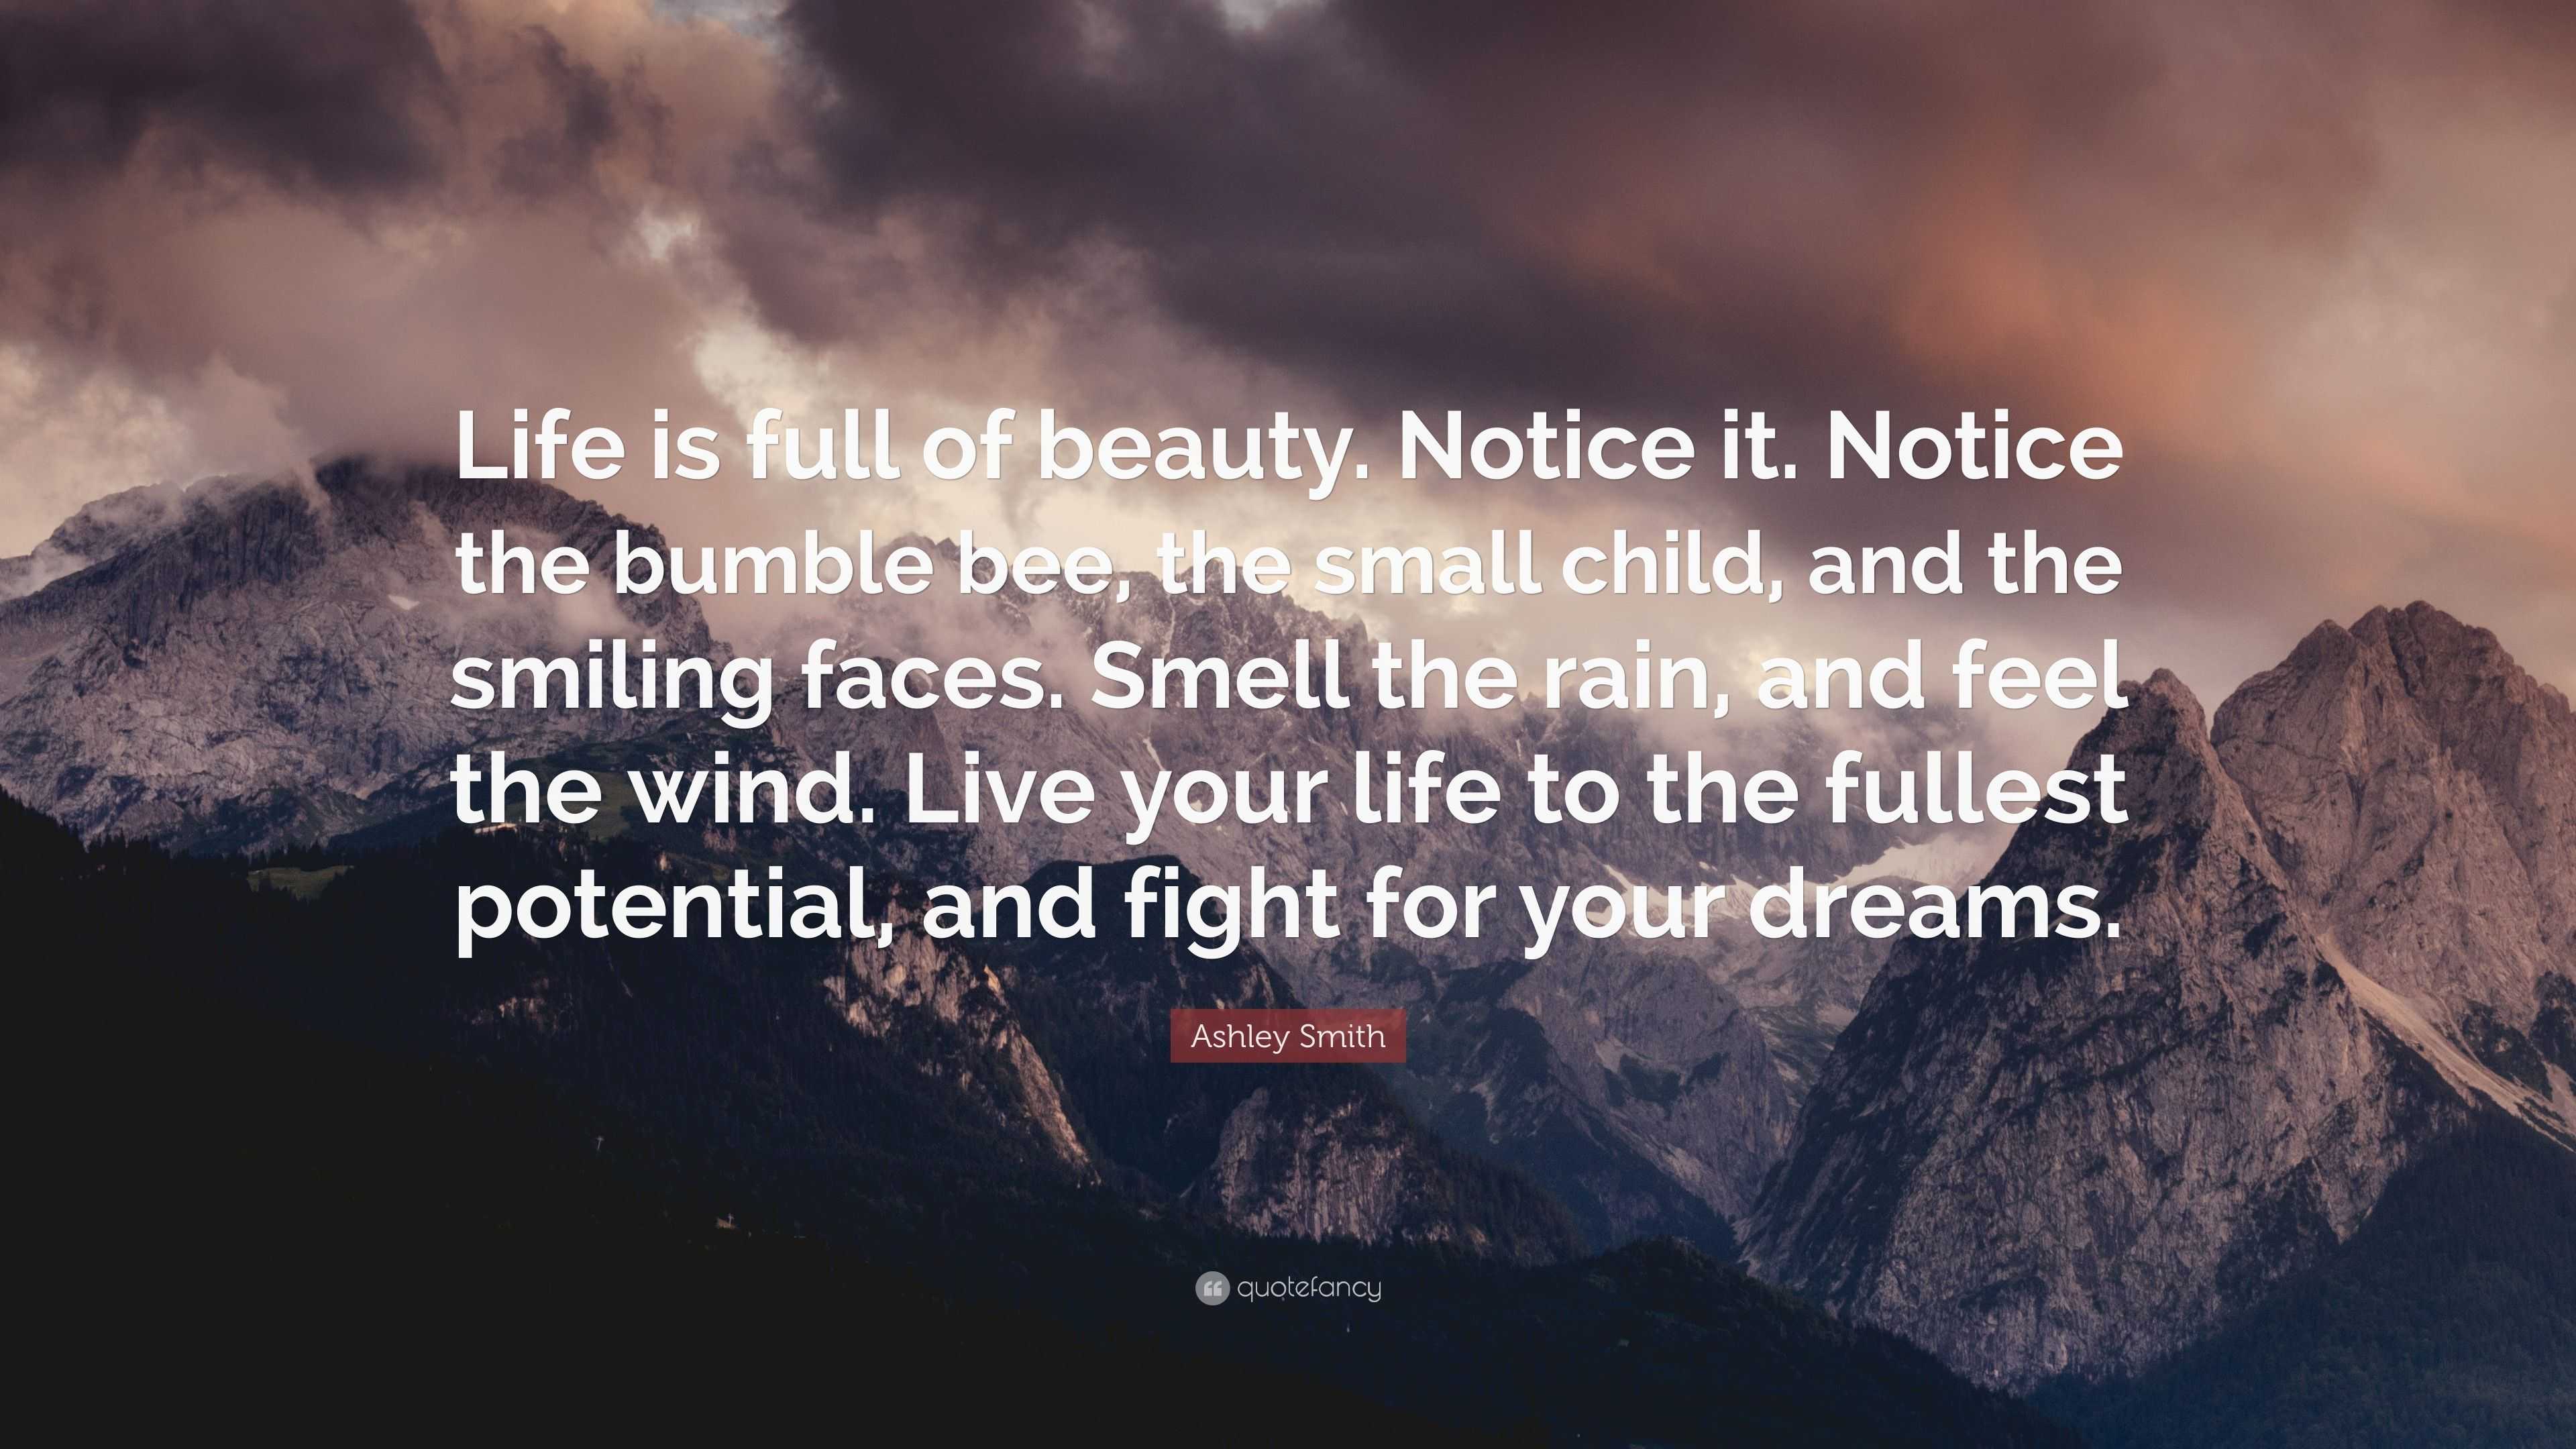 Ashley Smith Quote “Life is full of beauty Notice it Notice the